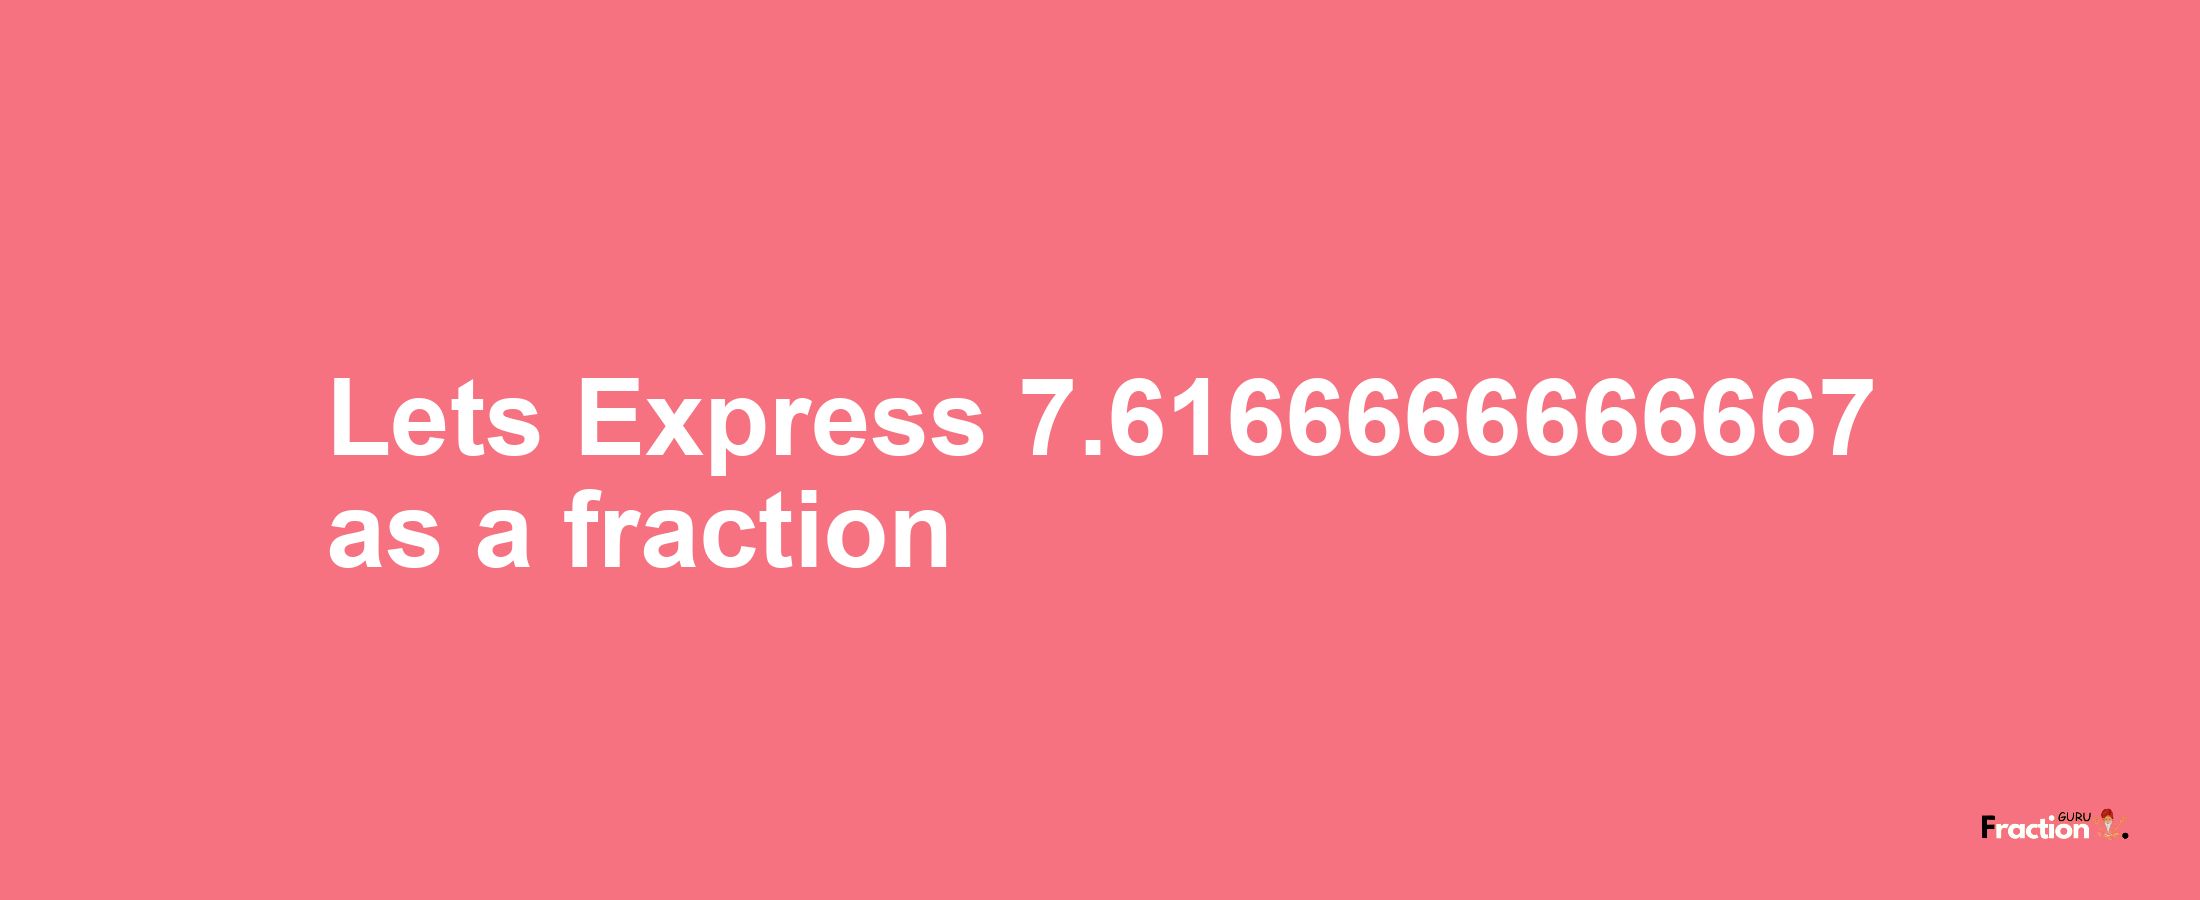 Lets Express 7.6166666666667 as afraction